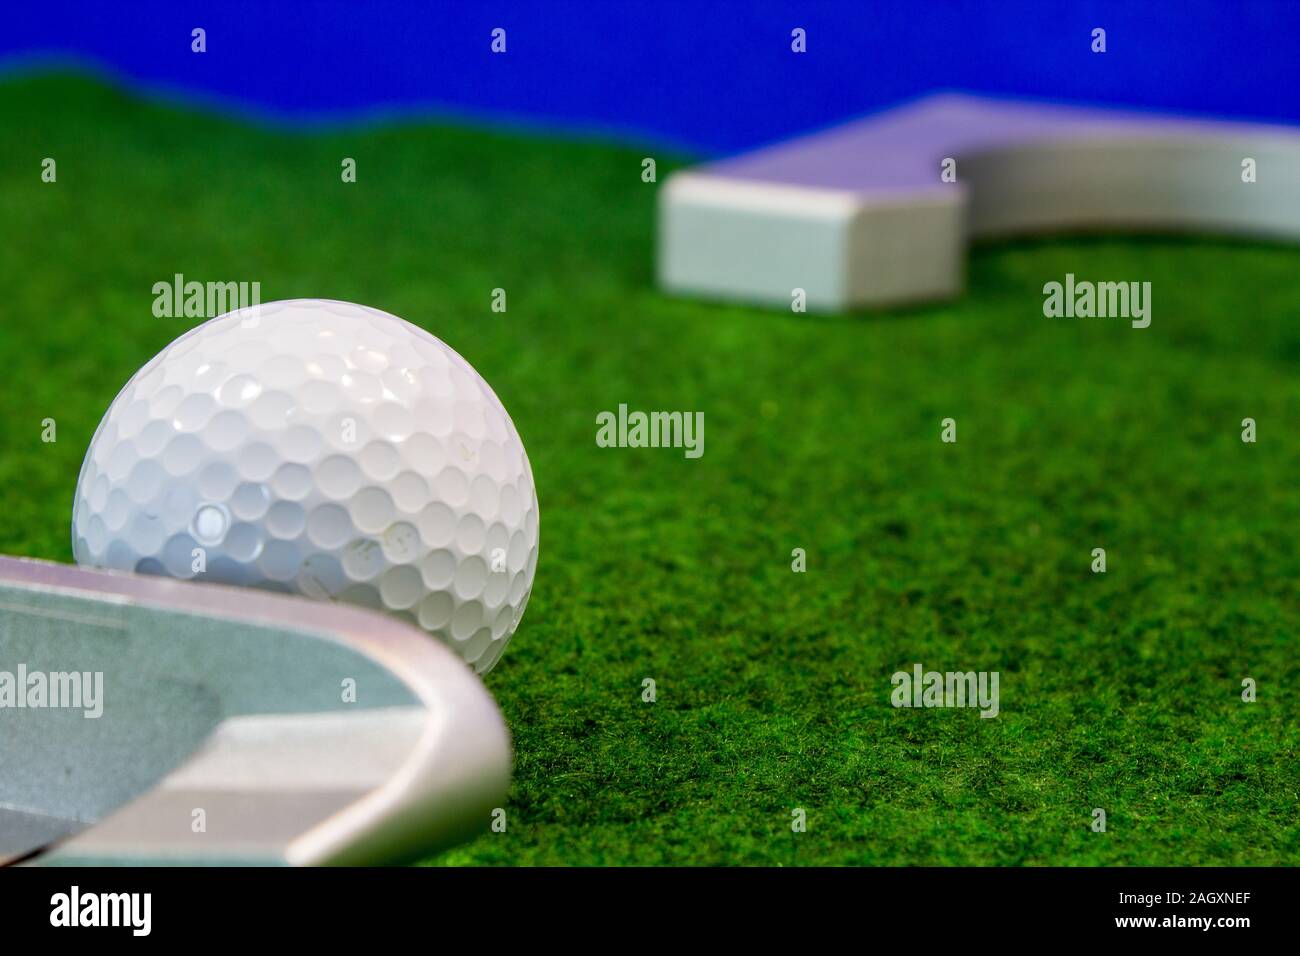 Putter, golf ball and destination for the relaxed office life Stock Photo